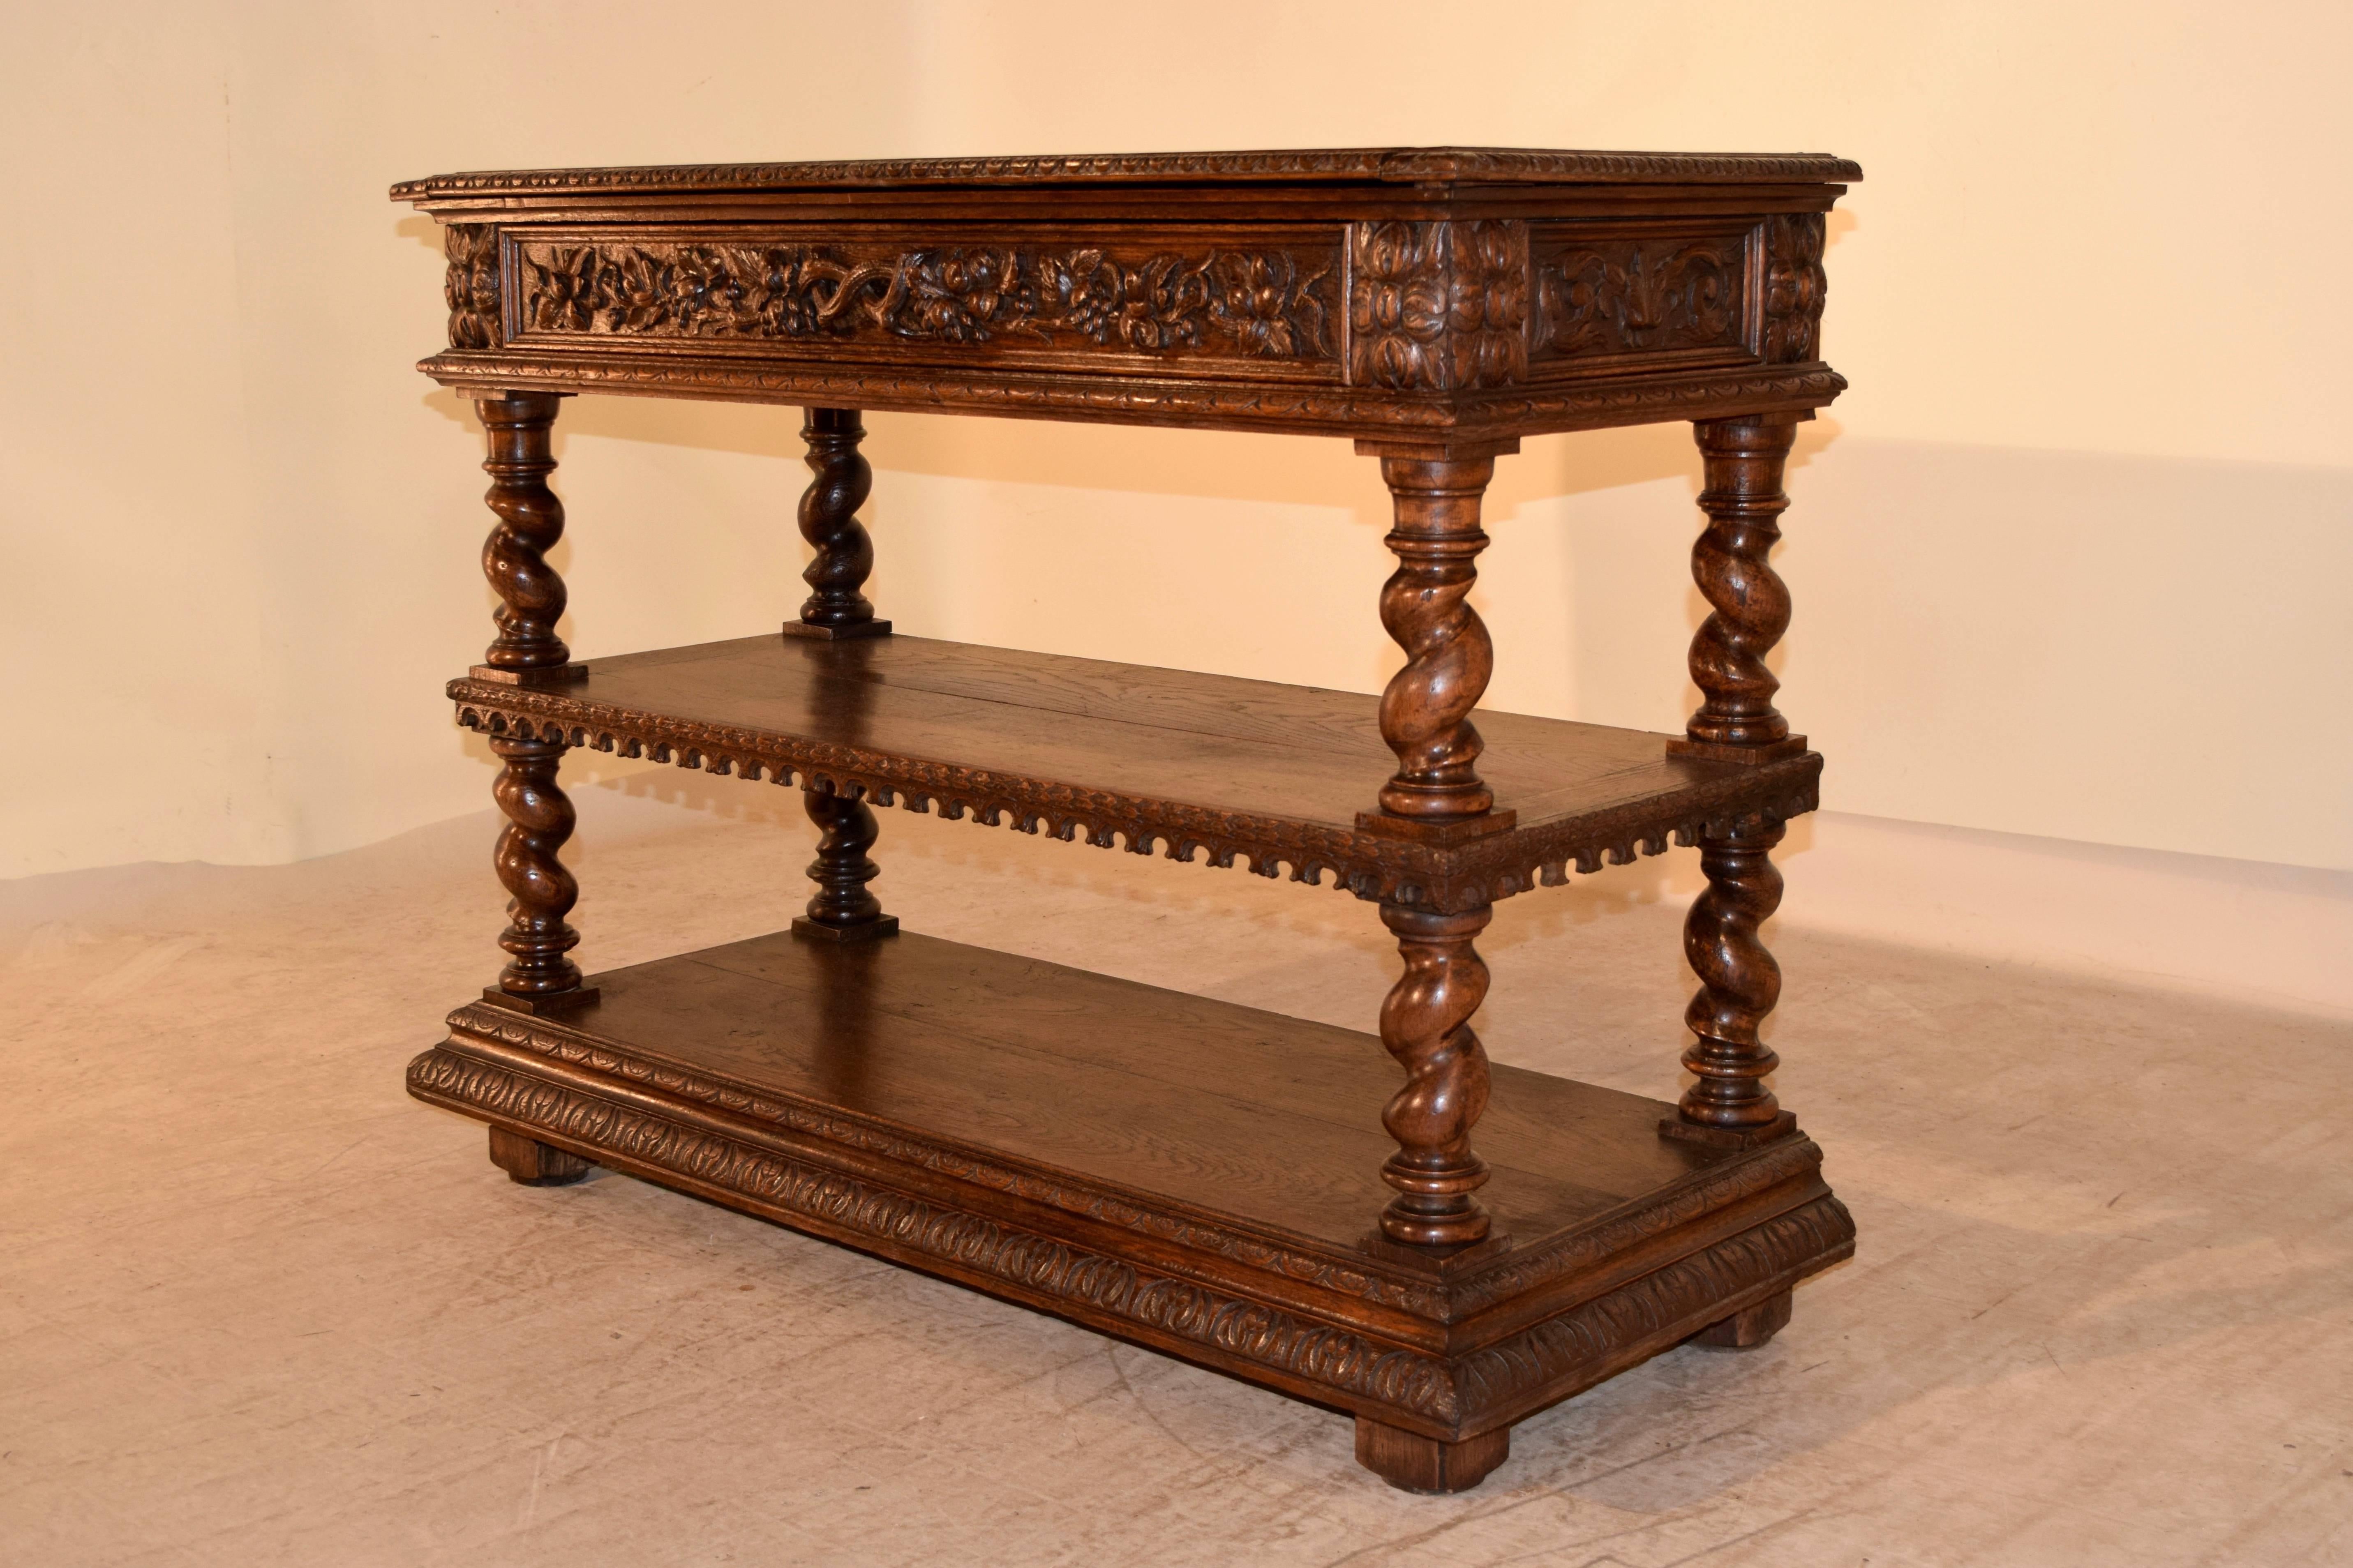 Napoleon III 19th Century French Dessert Buffet with Carved Decoration